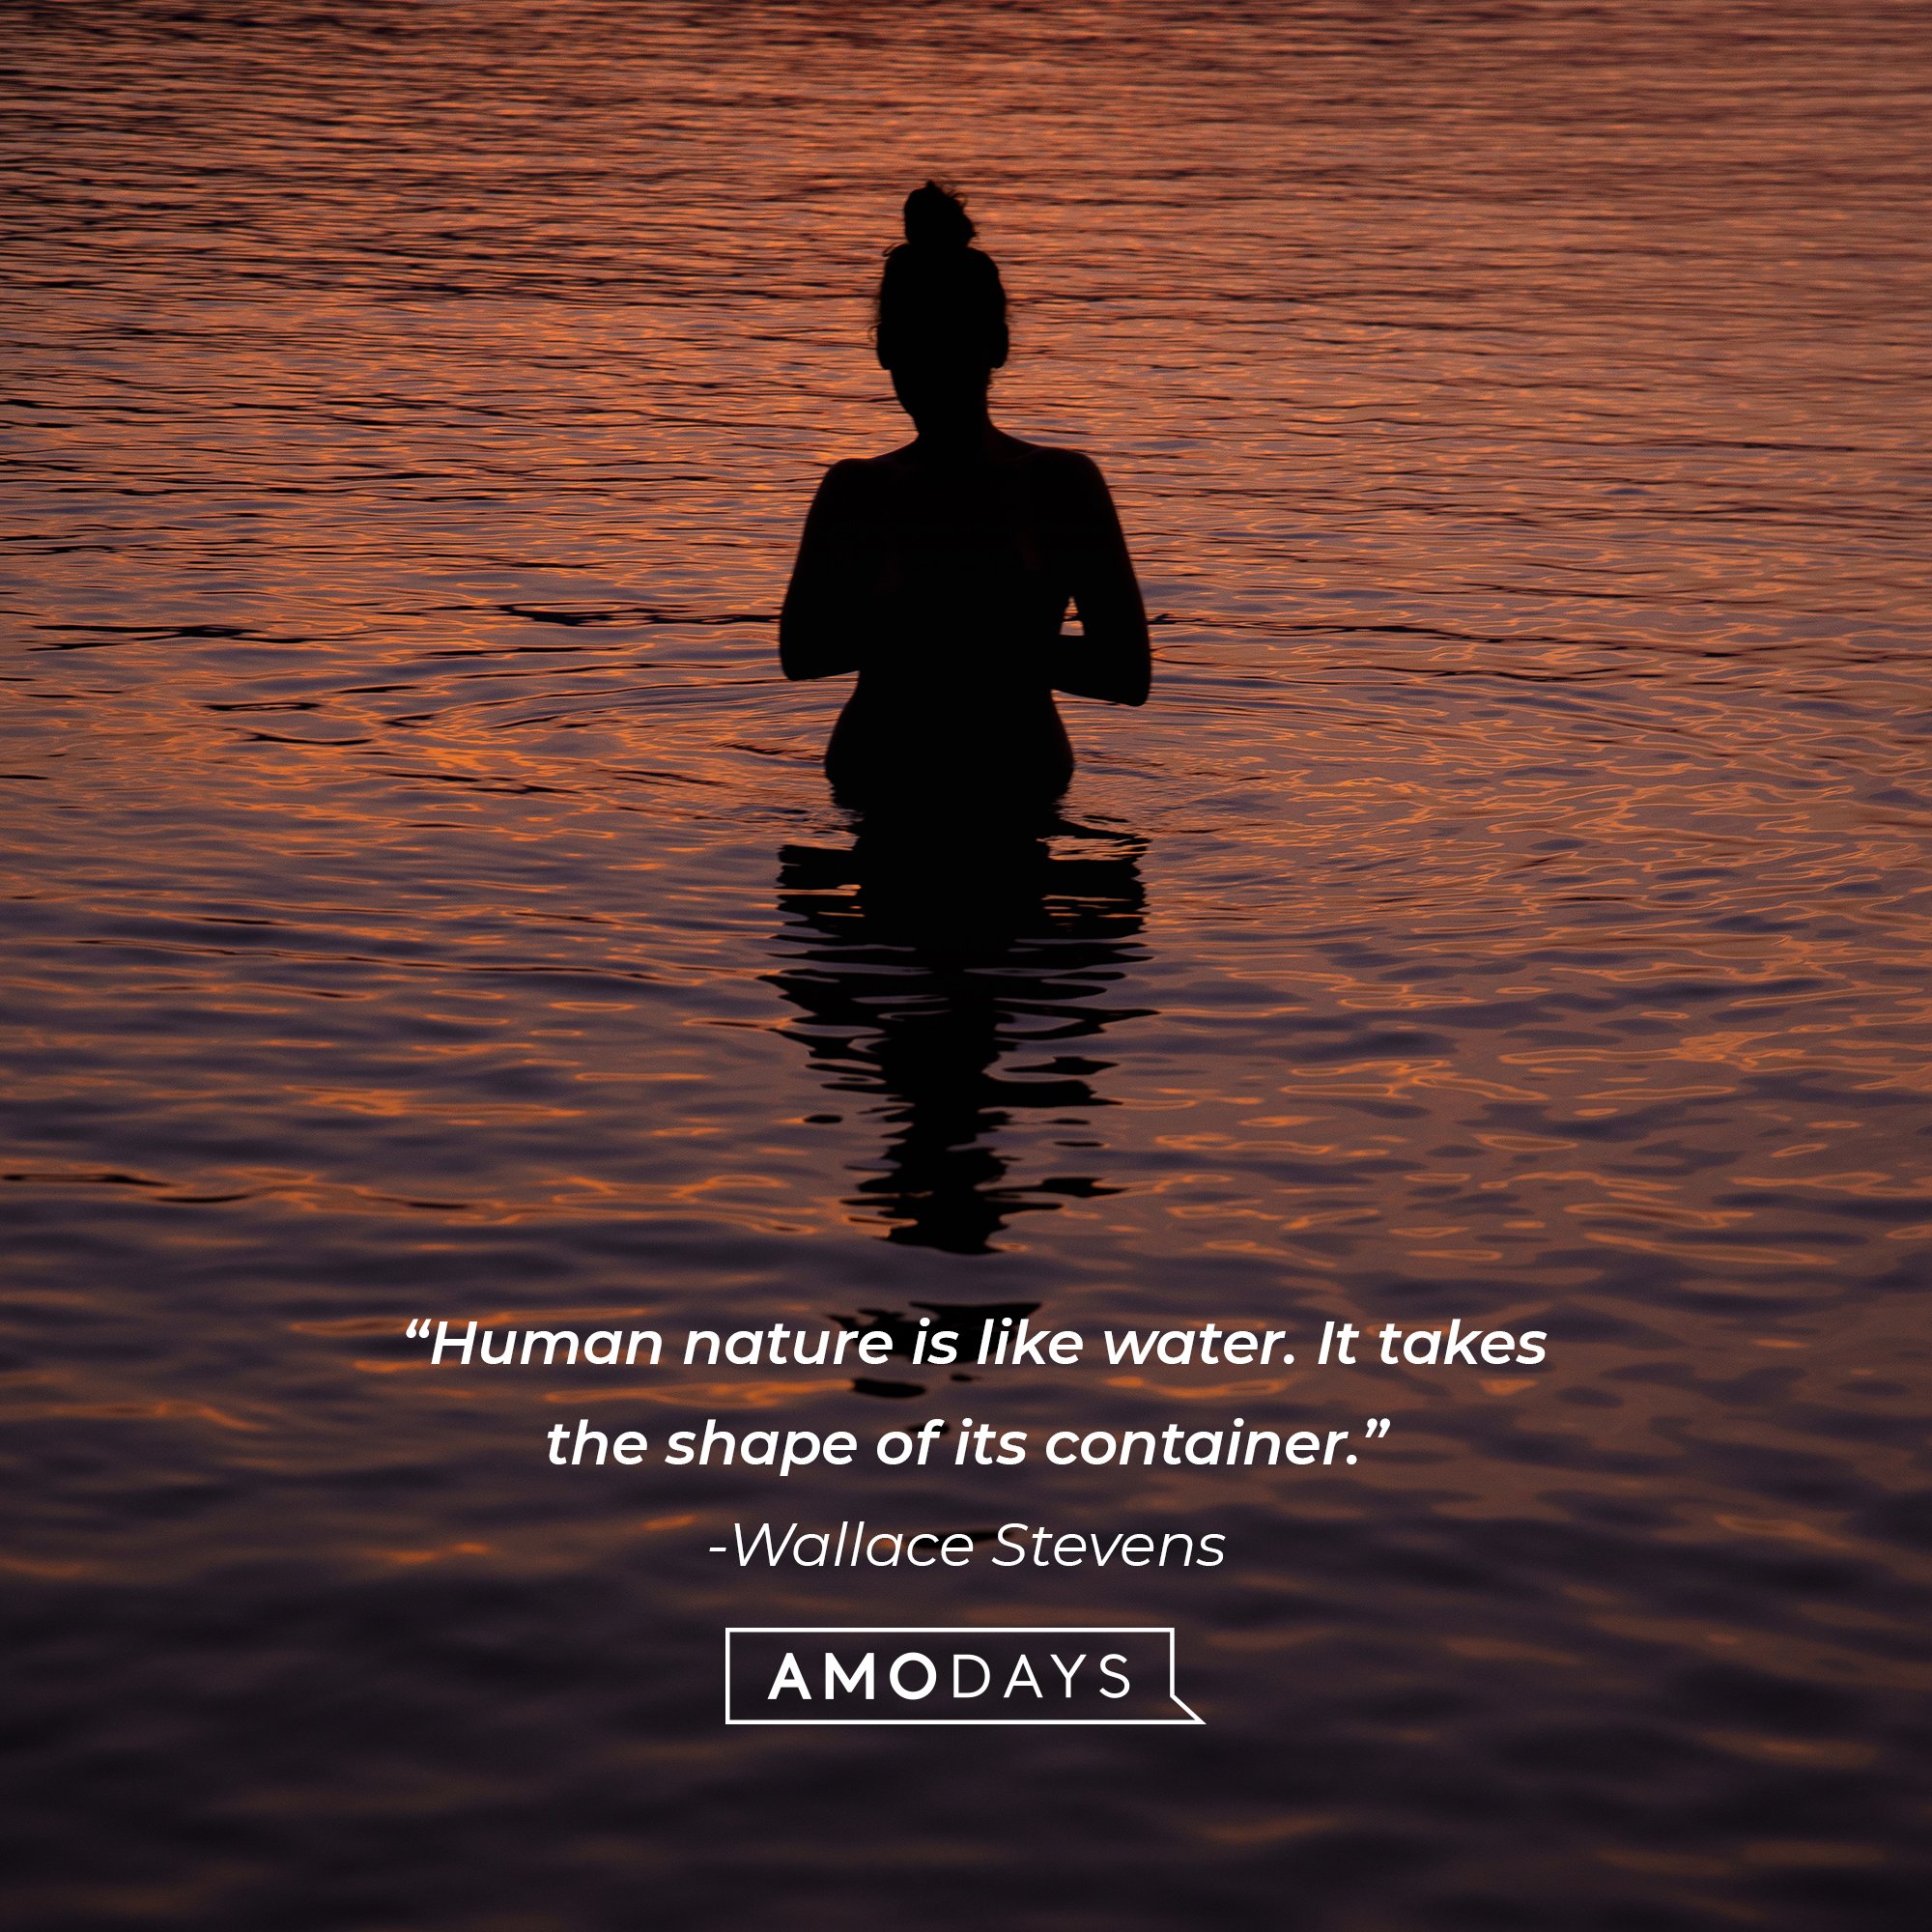 Wallace Steven’s quote: “Human nature is like water. It takes the shape of its container.” | Image: AmoDays